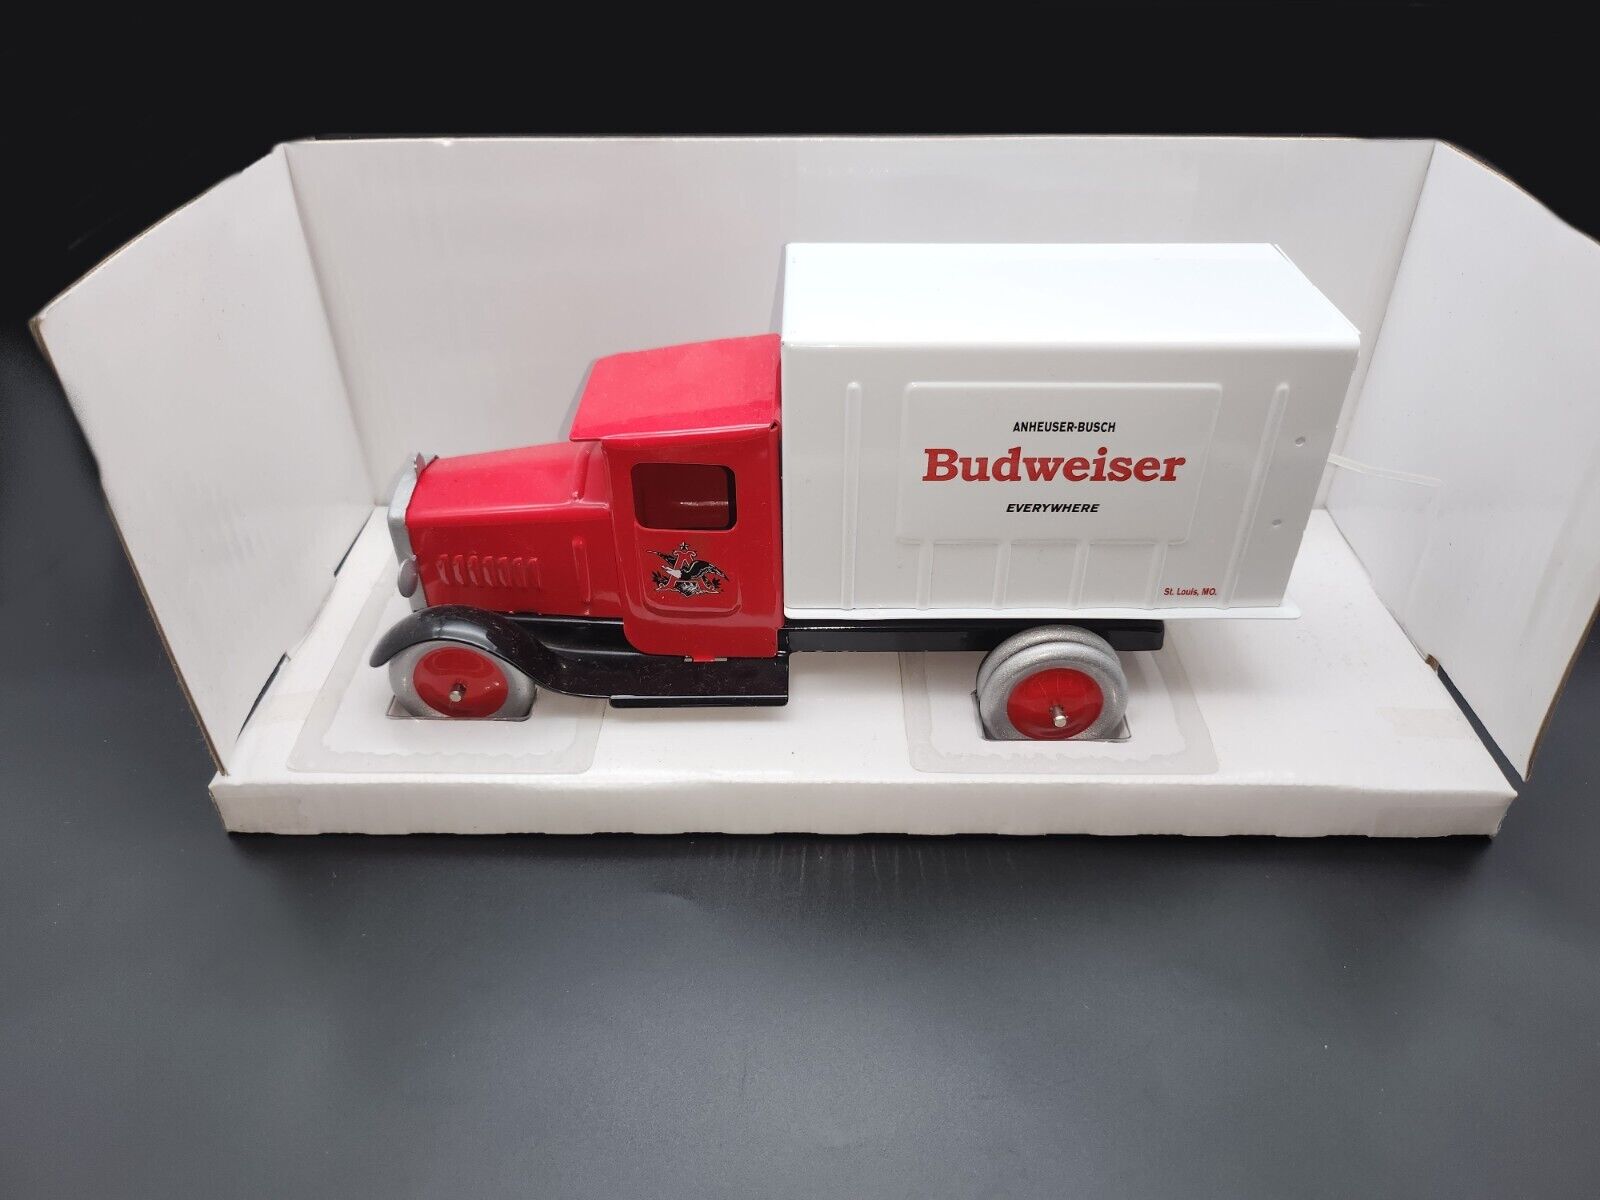 Spec Cast Steel Replica Limited Edition Budweiser Beer Delivery Truck, L-4773